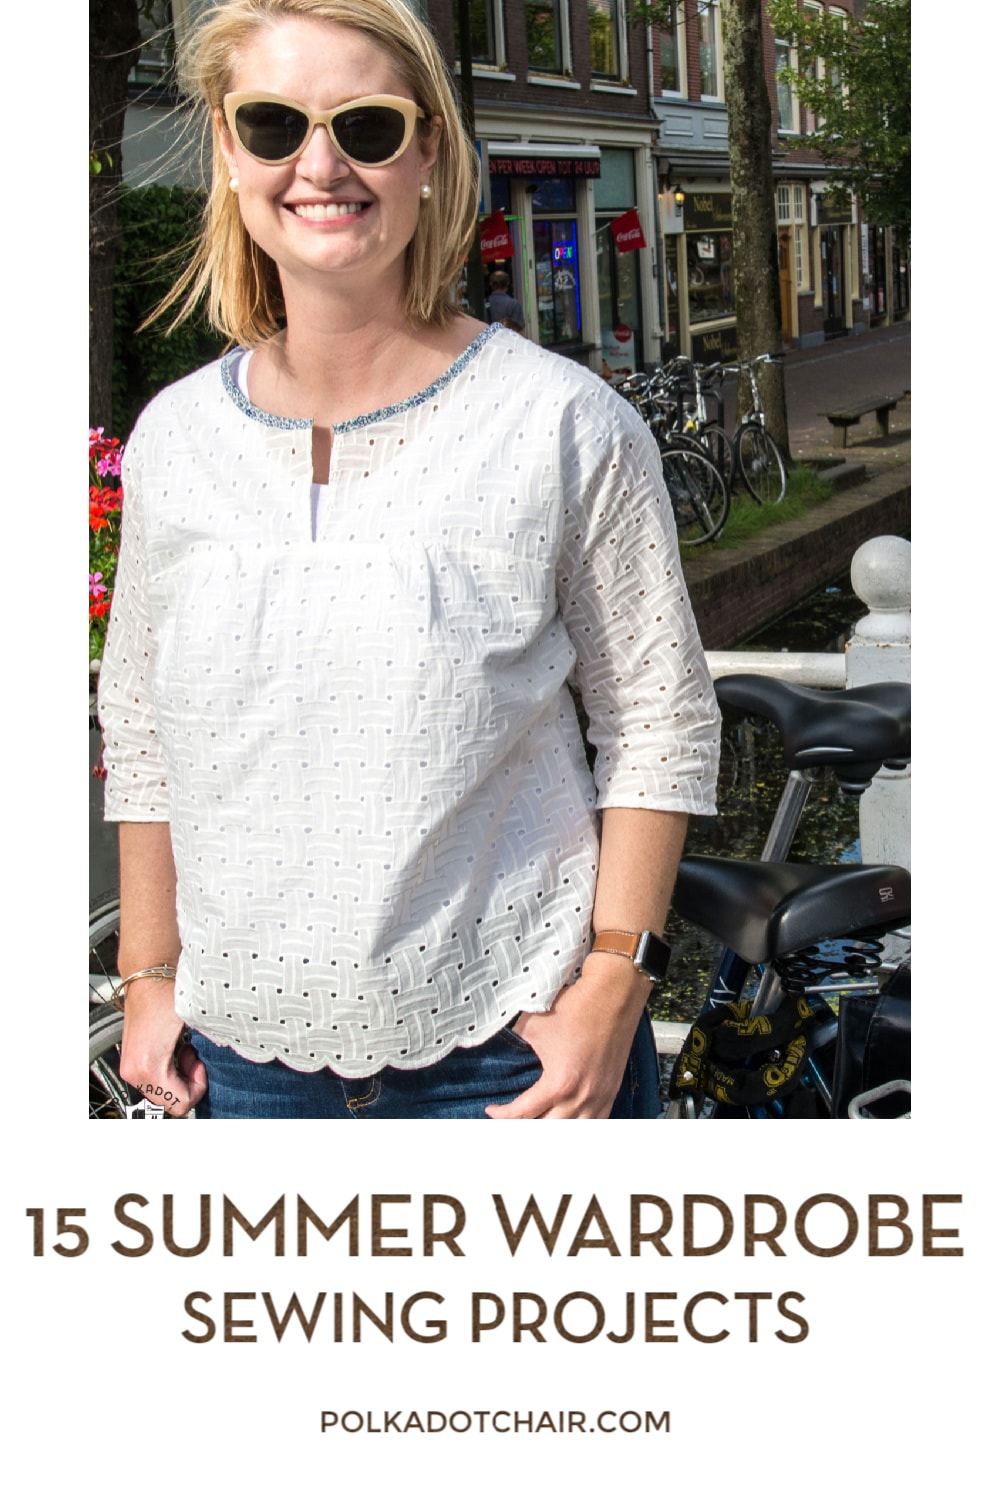 15 Summer Wardrobe Sewing Projects & Patterns